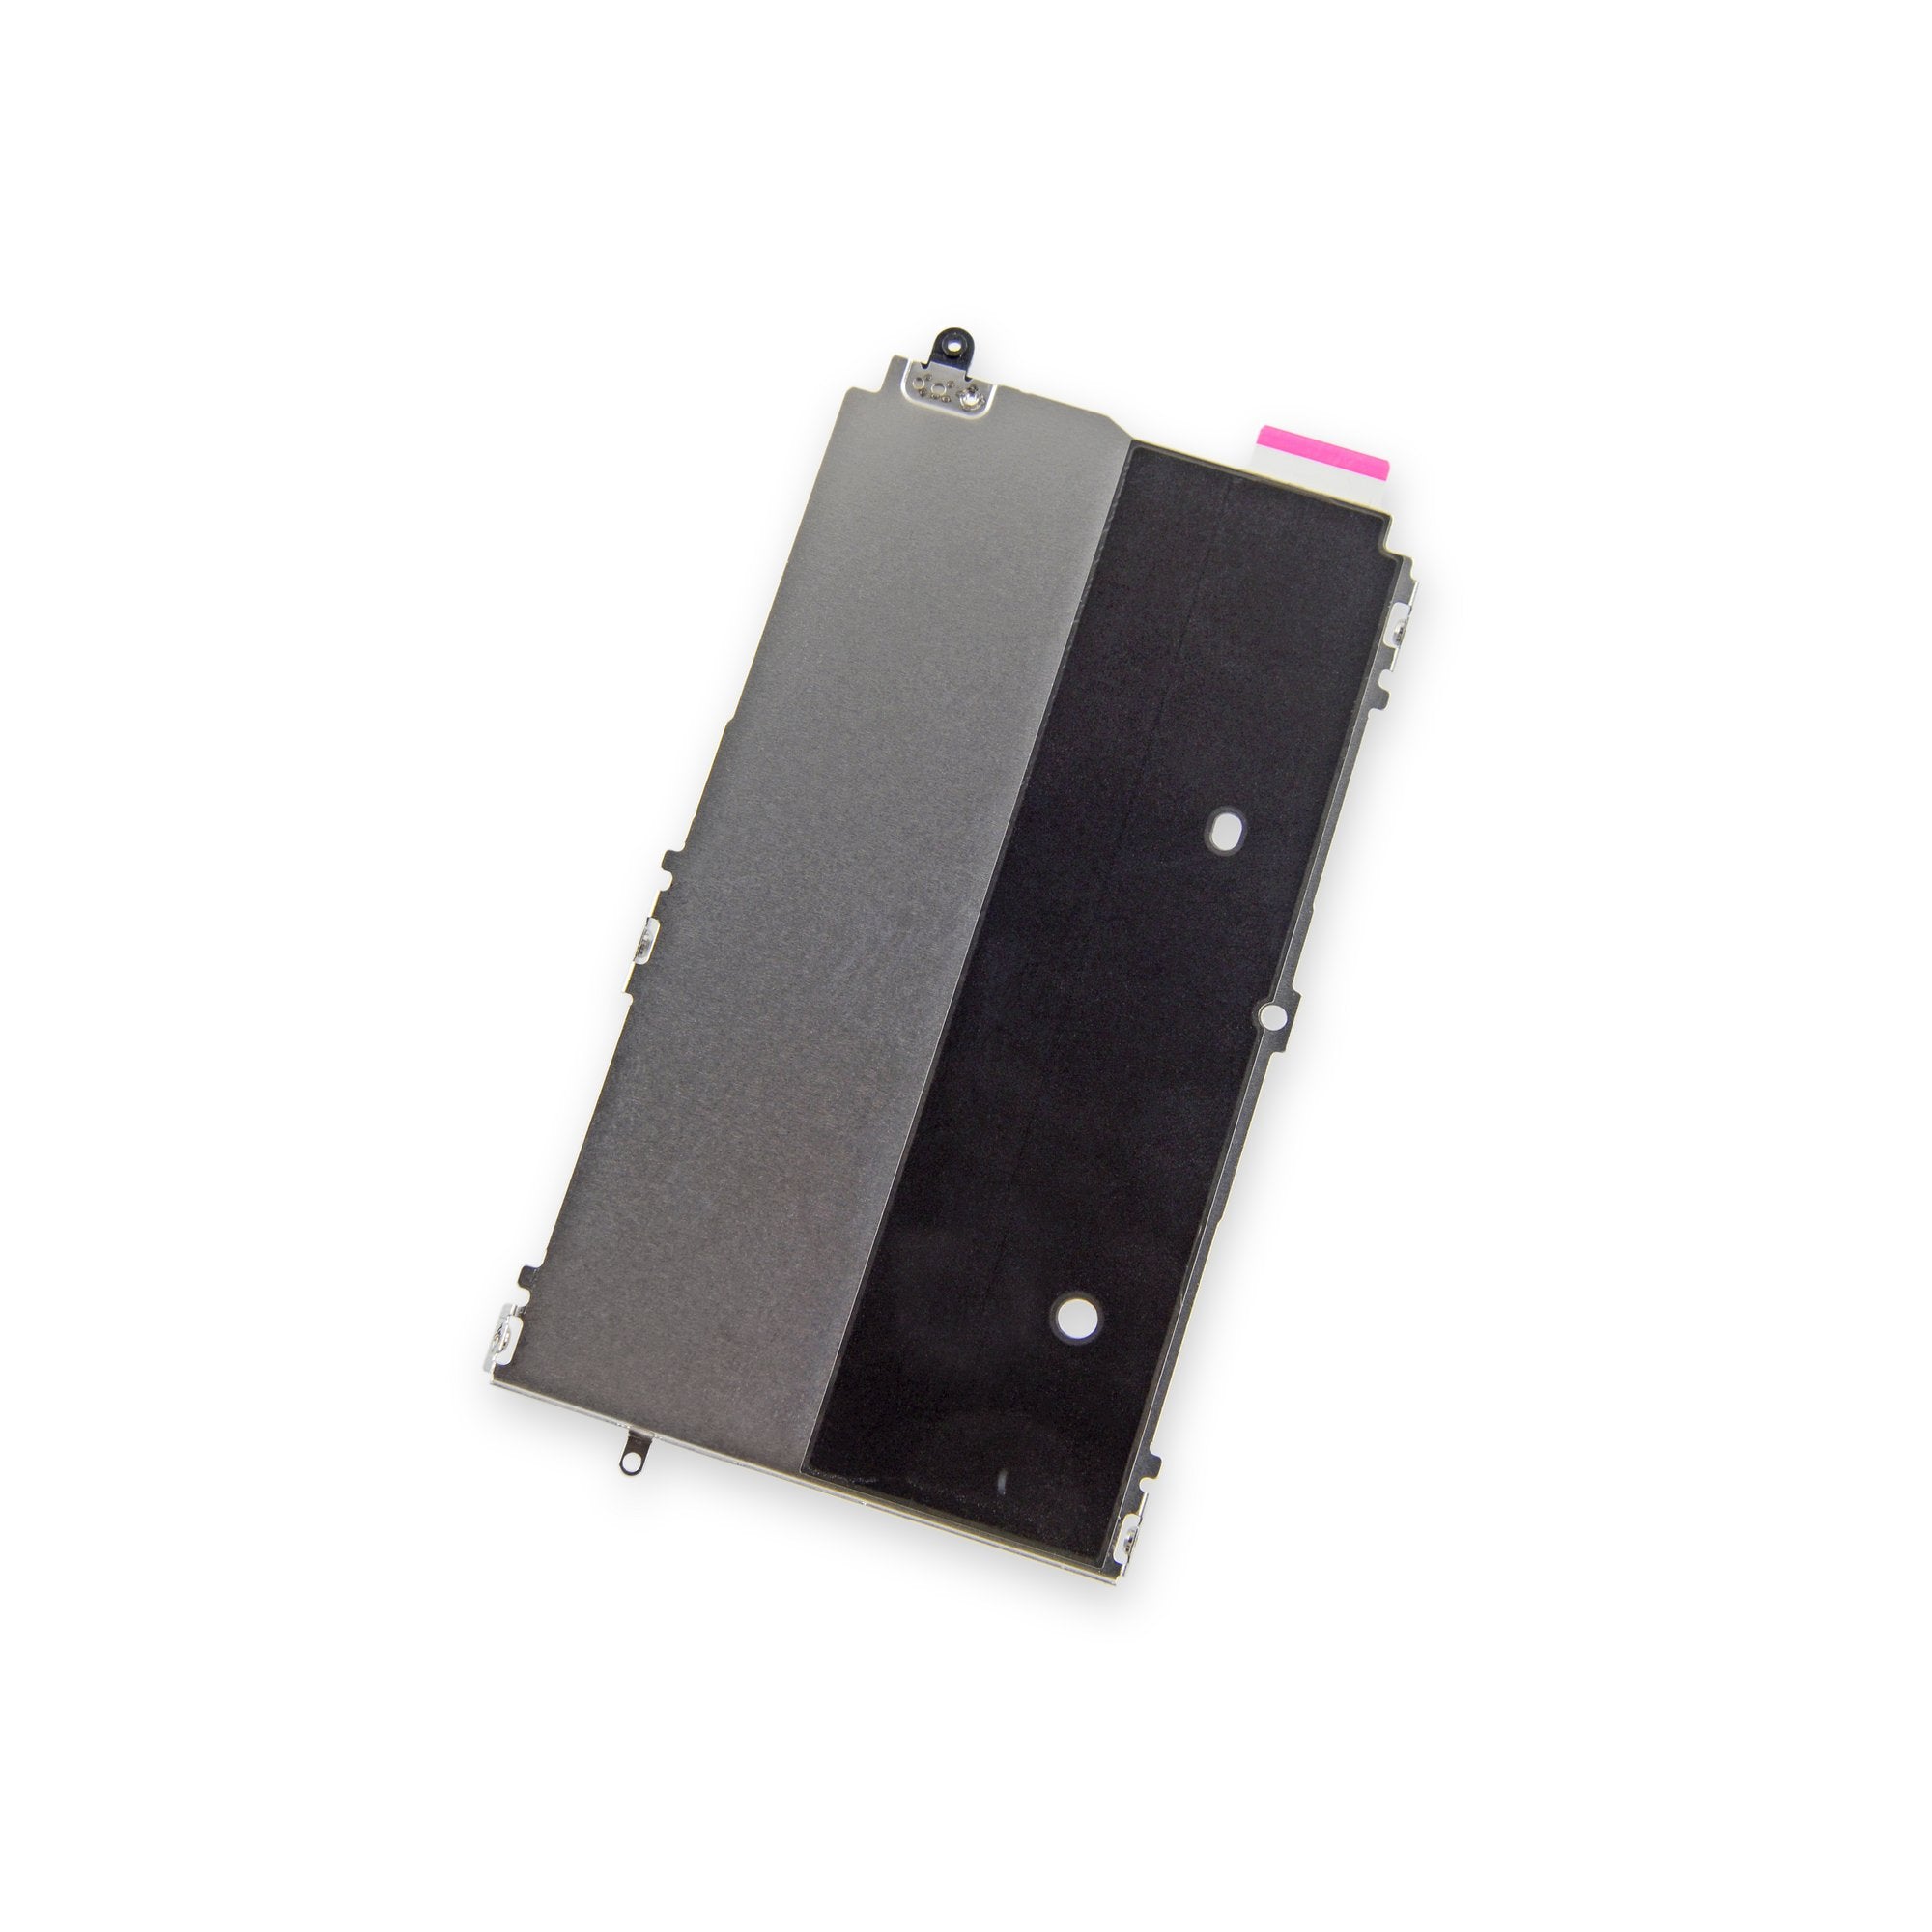 iPhone 5s/SE (1st Gen) LCD Shield Plate New